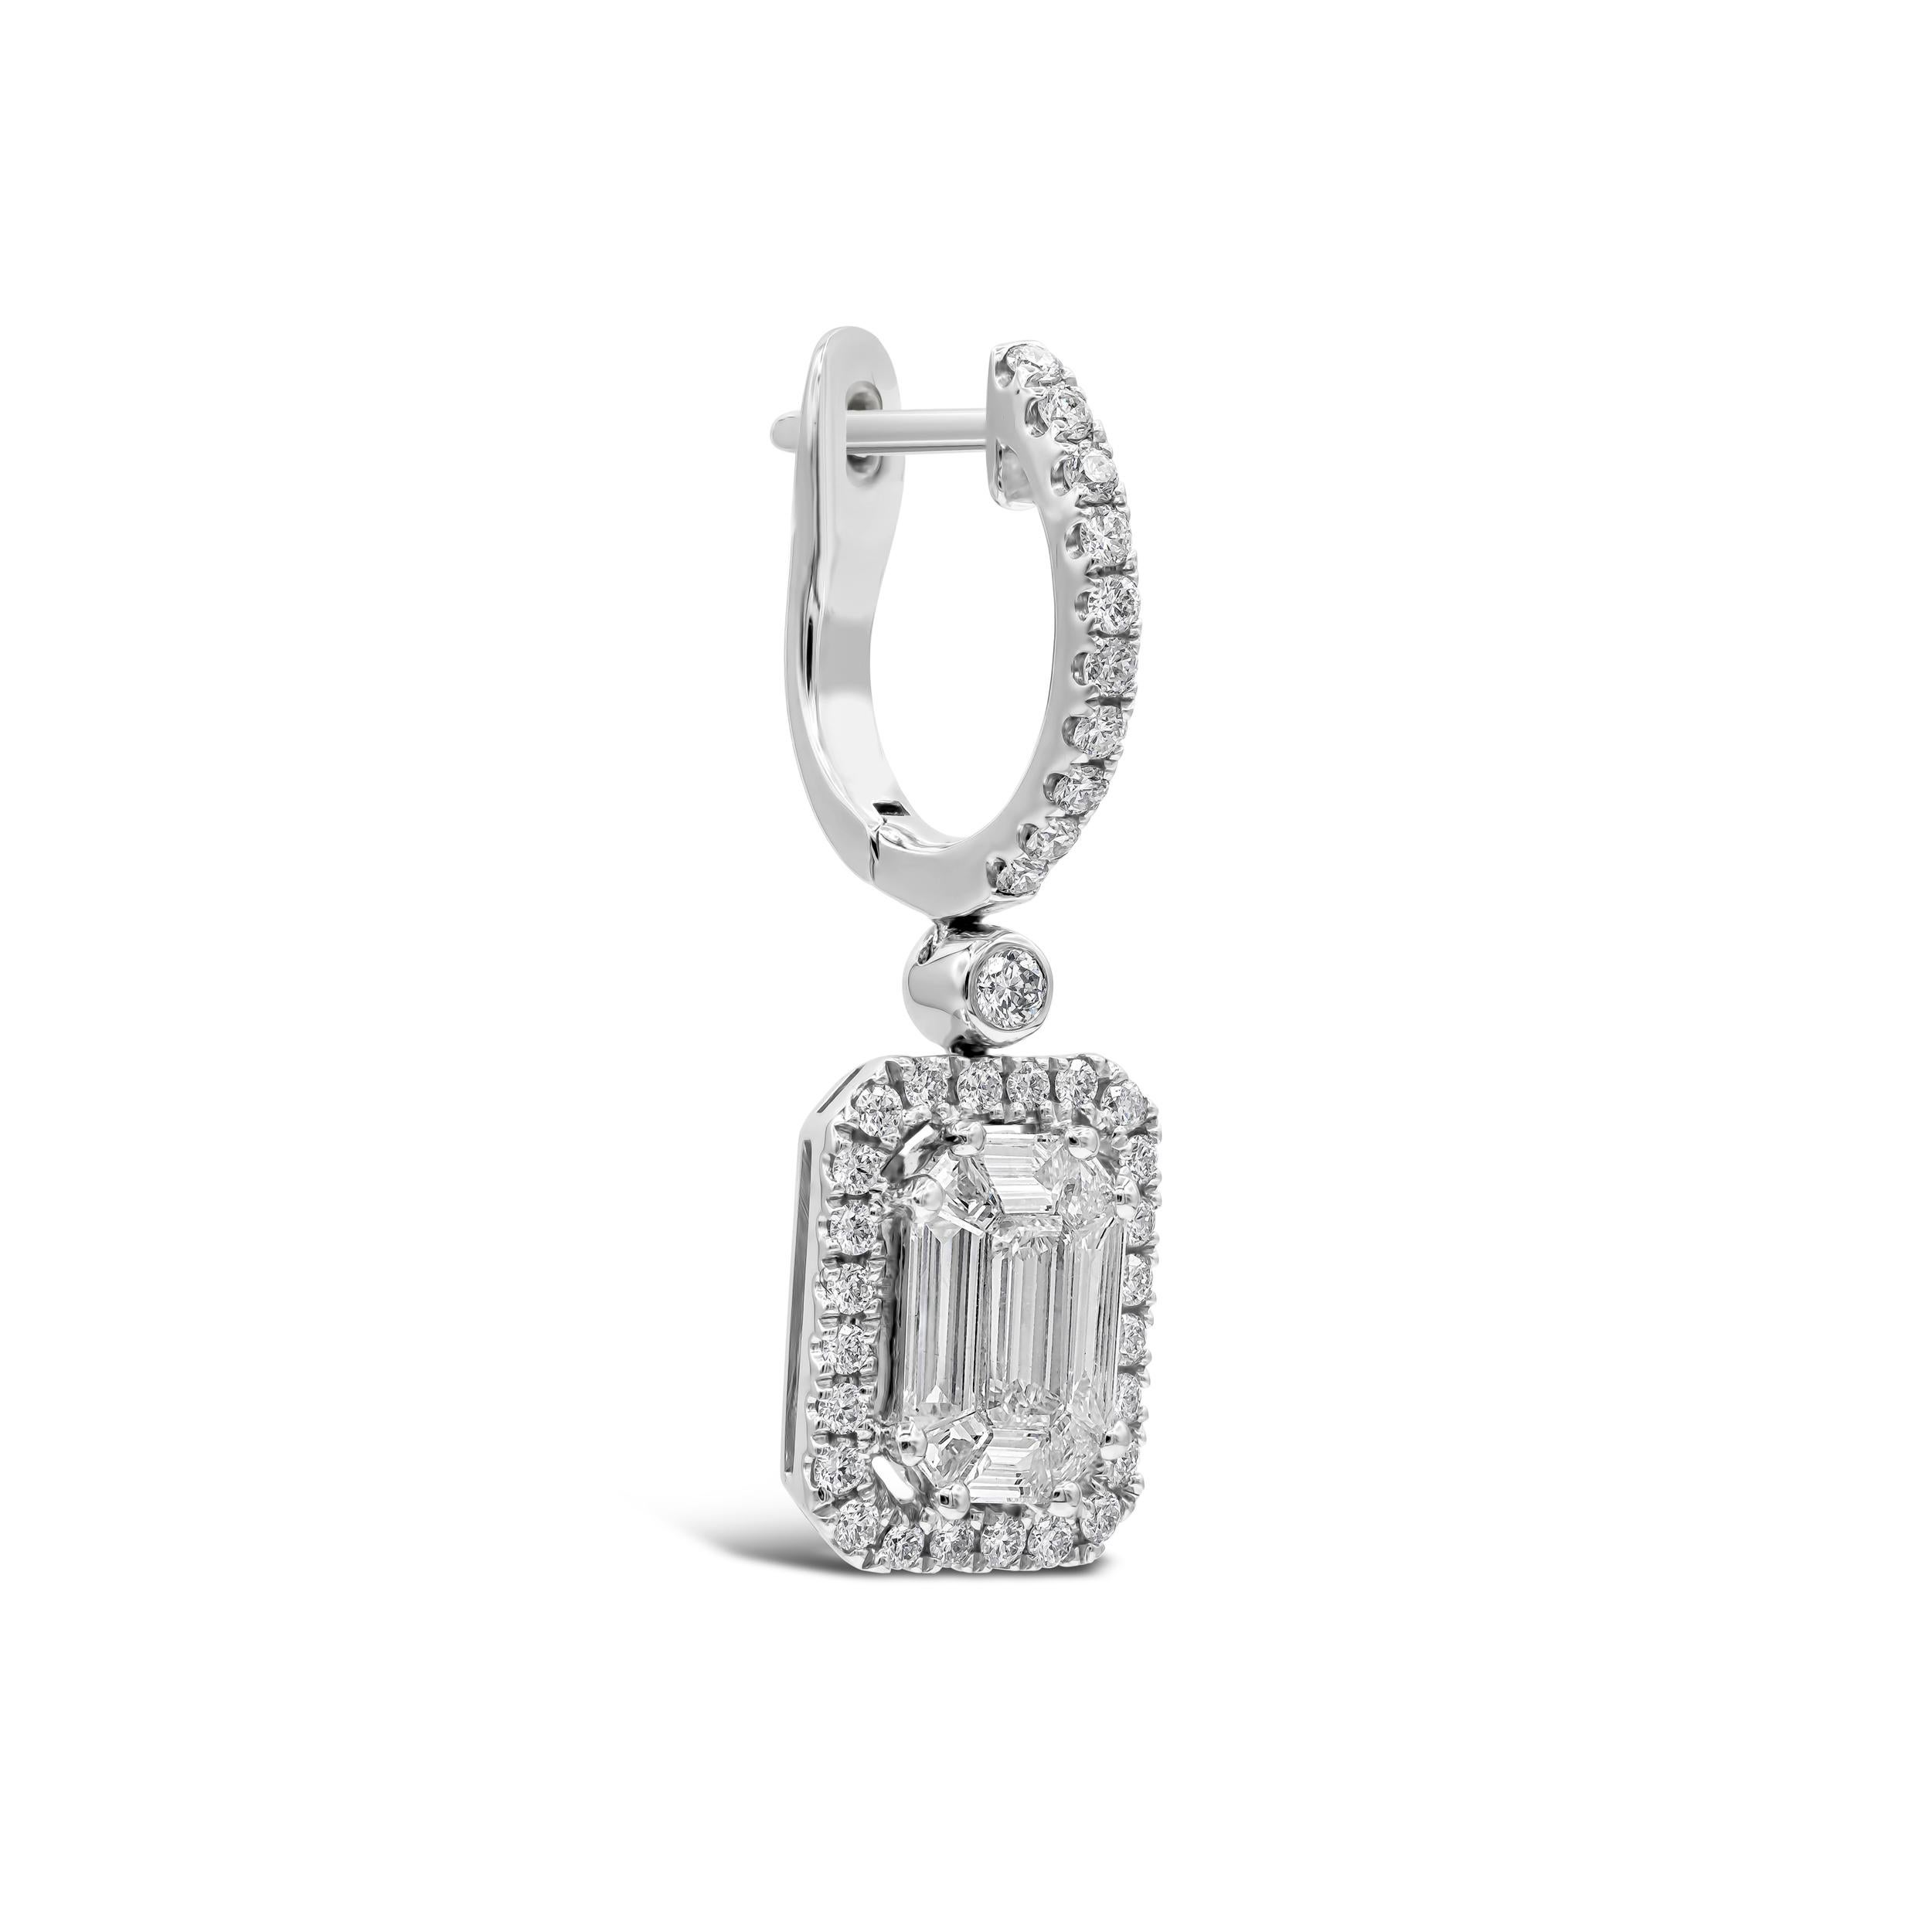 An elegant pair of earrings showcasing baguette and emerald cut diamonds in the center, Invisible set in an illusion design. Surrounded by brilliant round diamonds in a halo design and suspended on a diamond encrusted hoop. Diamonds weigh 1.22